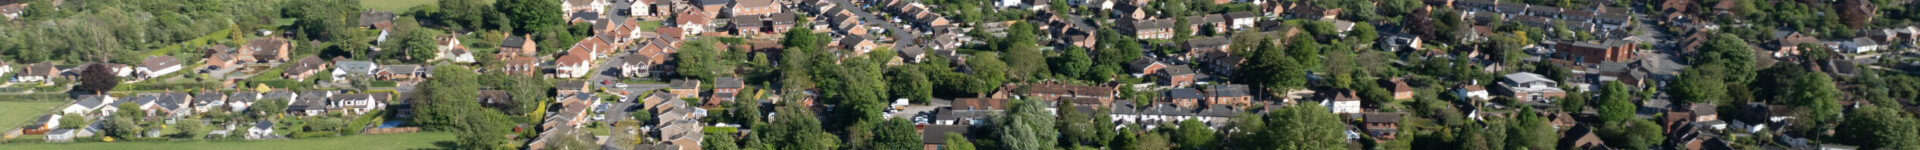 An aerial view of Cholsey